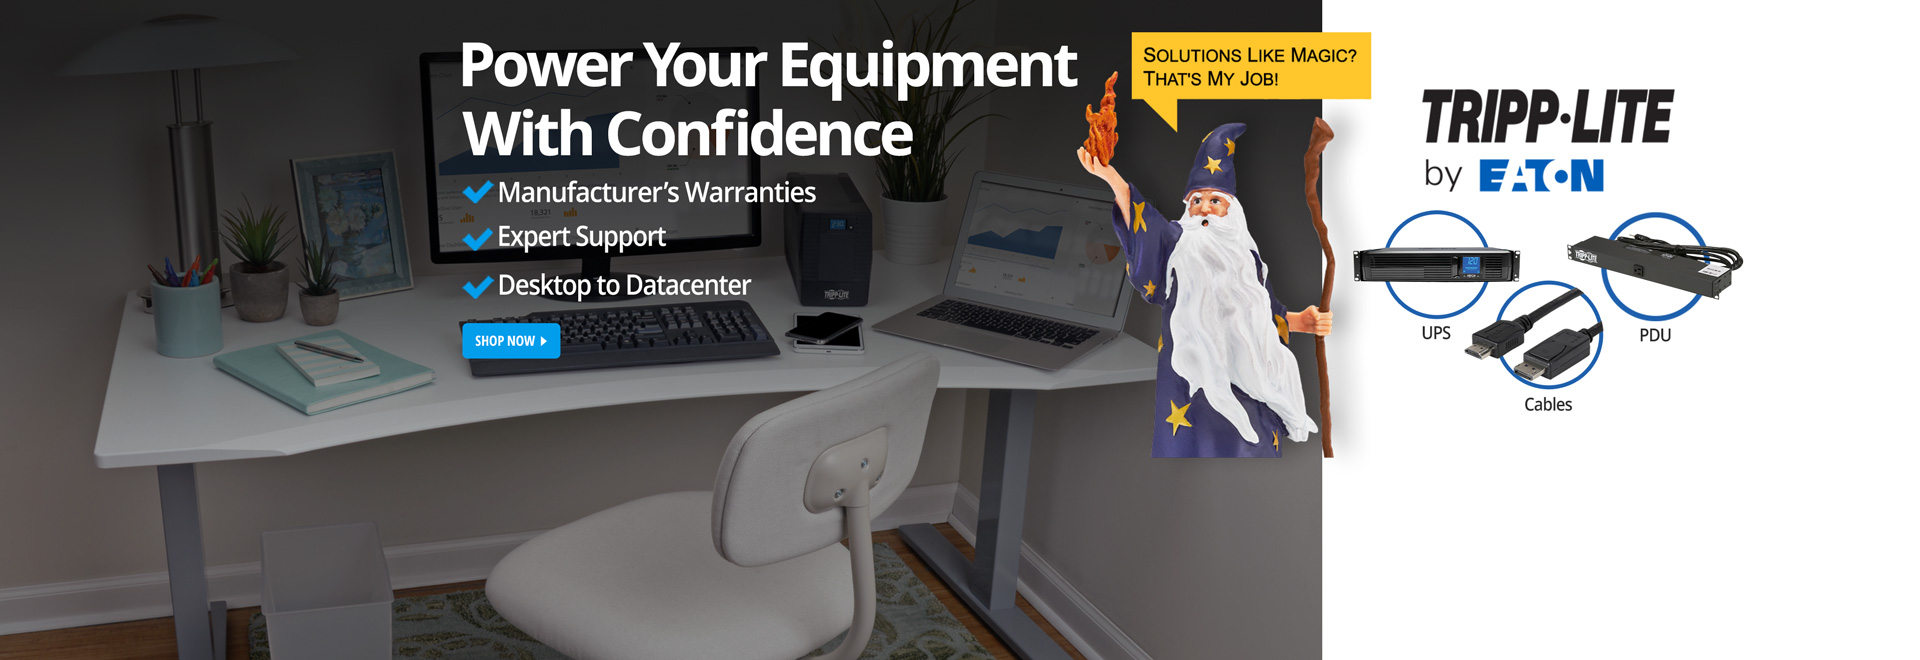 Power Your Equipment With Confidence